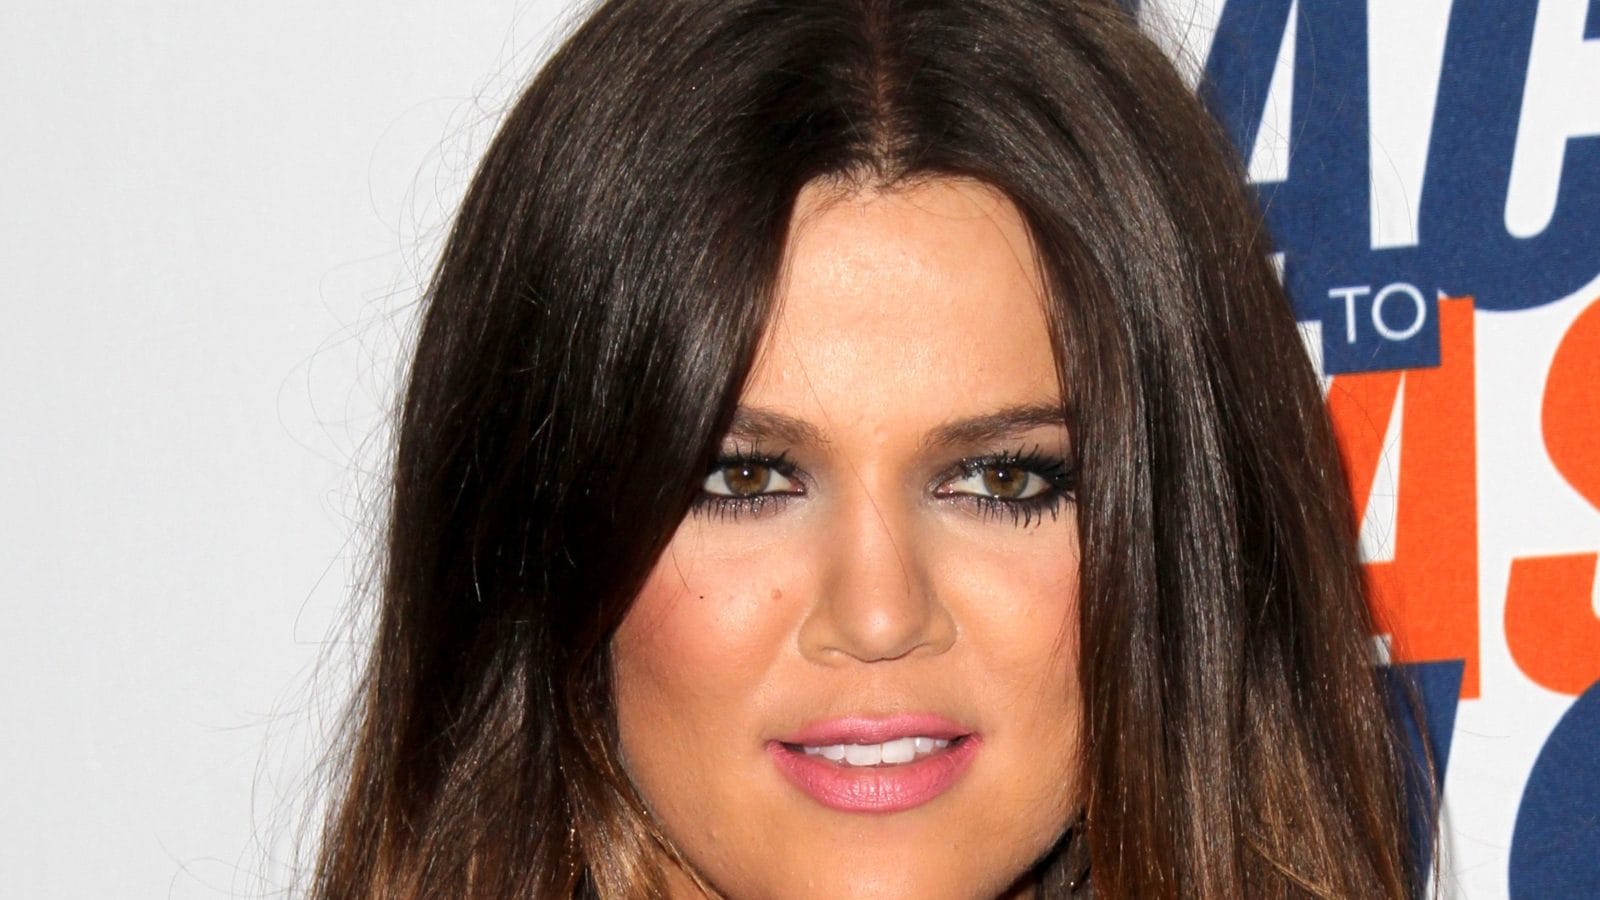 Khloe Kardashian Denies Dating Rumors With Nba Star Focus On My Daughter Myself For A While